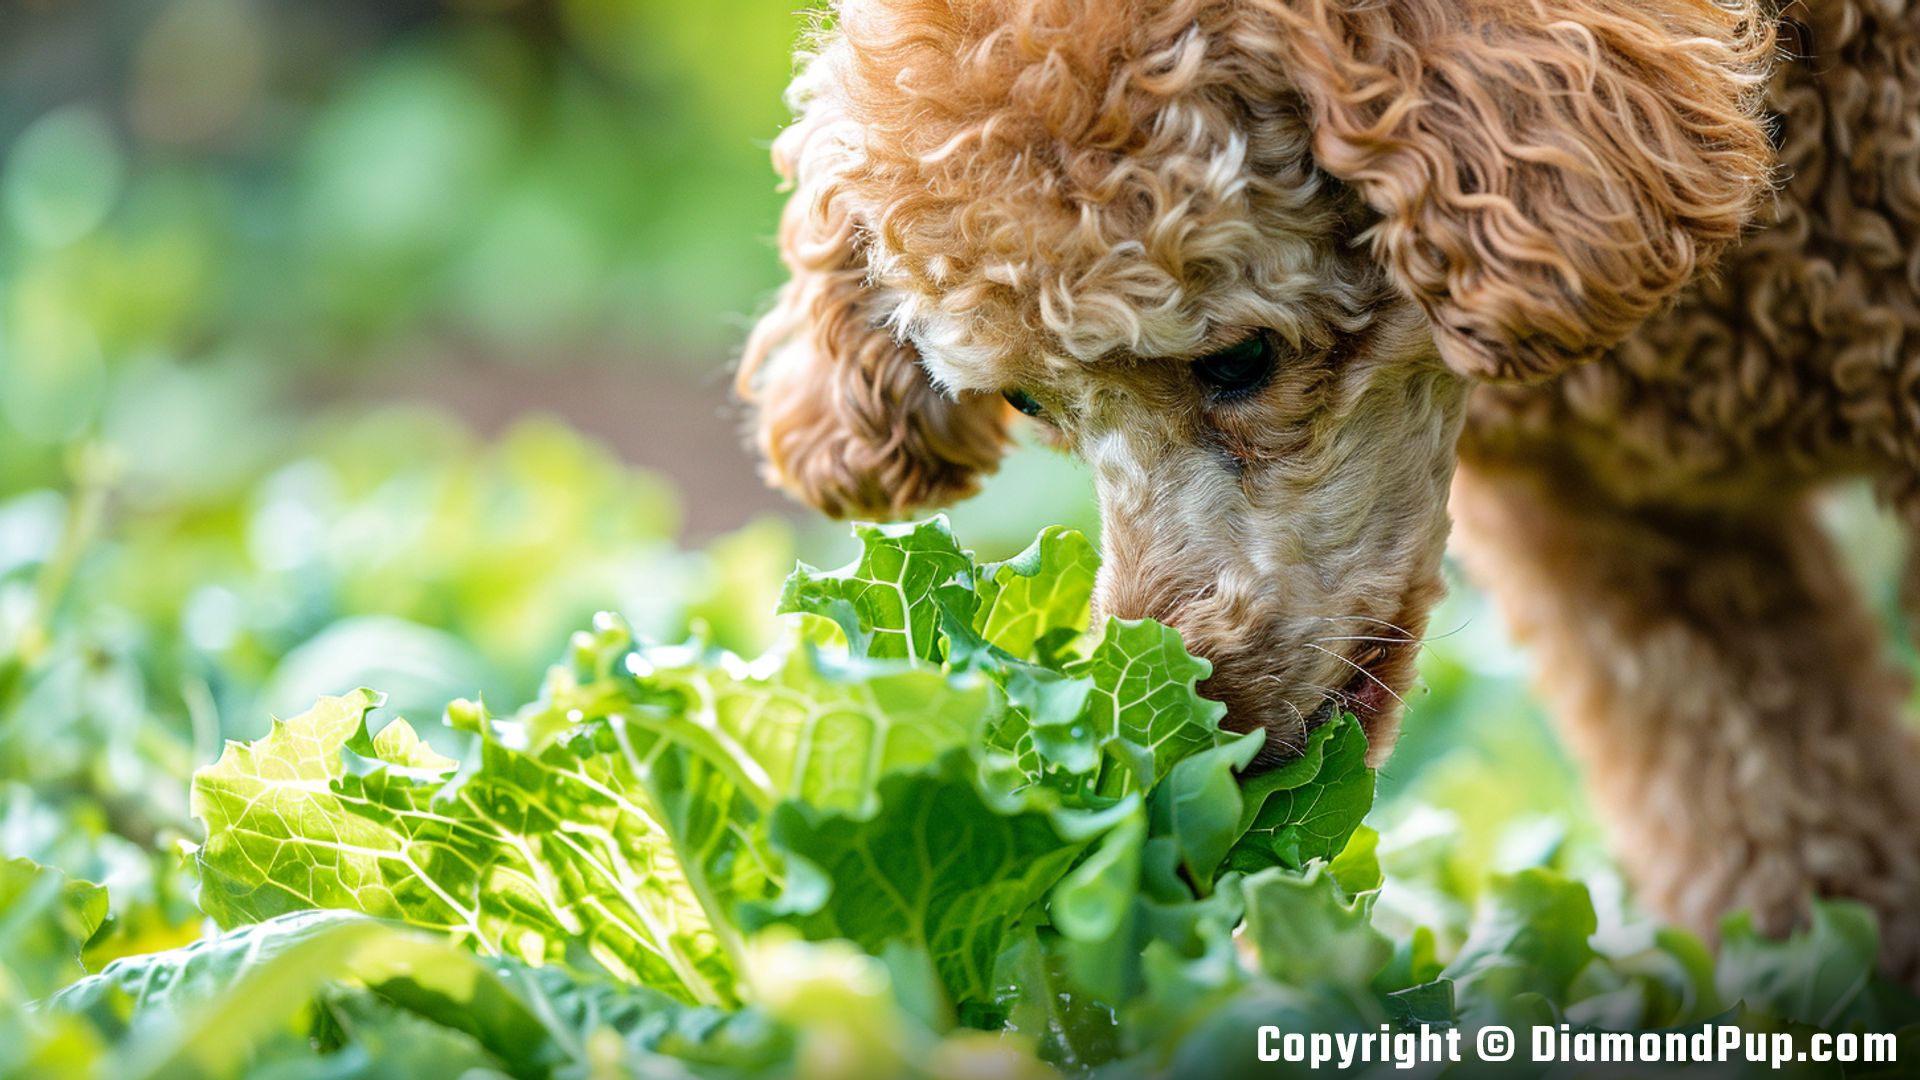 Image of Poodle Snacking on Lettuce